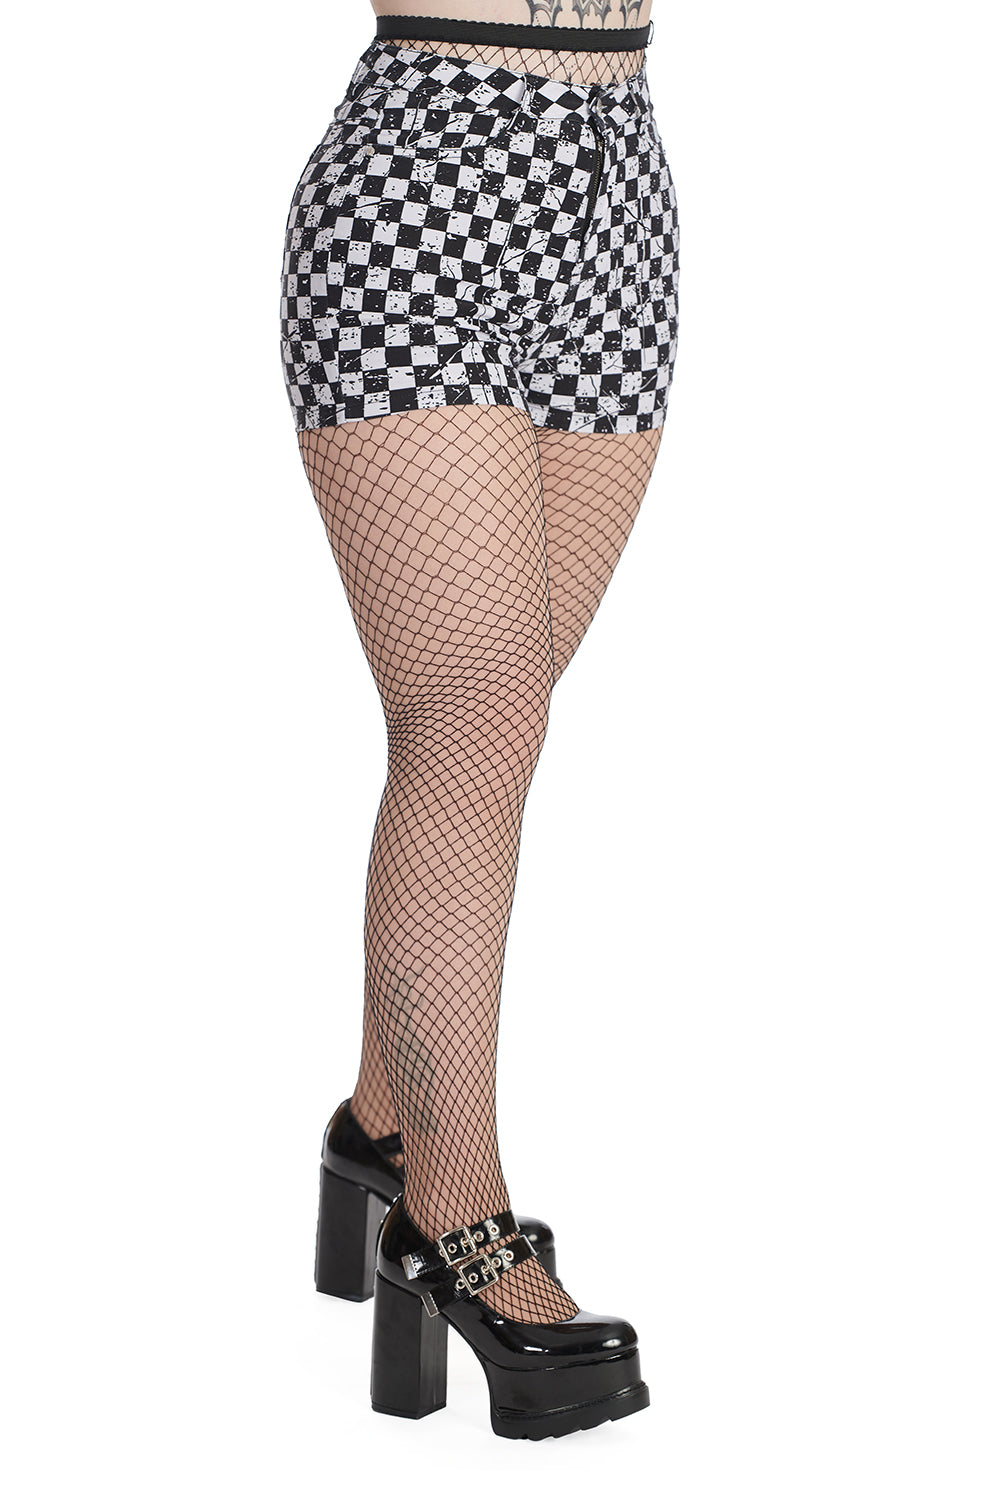 Banned Alternative CHECKERS SHORTS